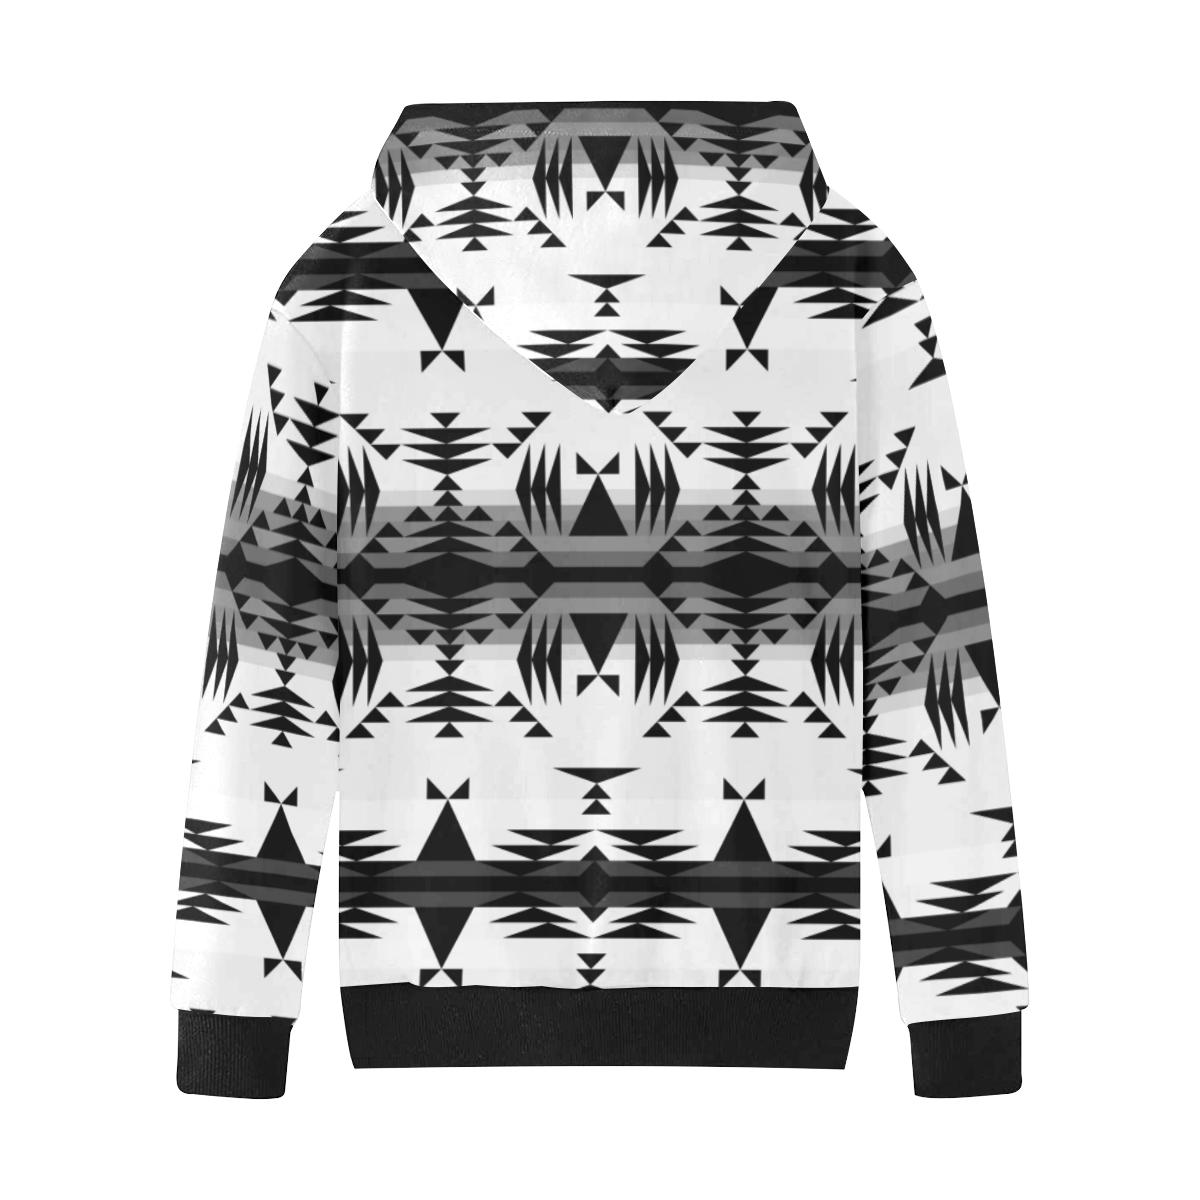 Between the Mountains White and Black Kids' All Over Print Hoodie (Model H38) Kids' AOP Hoodie (H38) e-joyer 